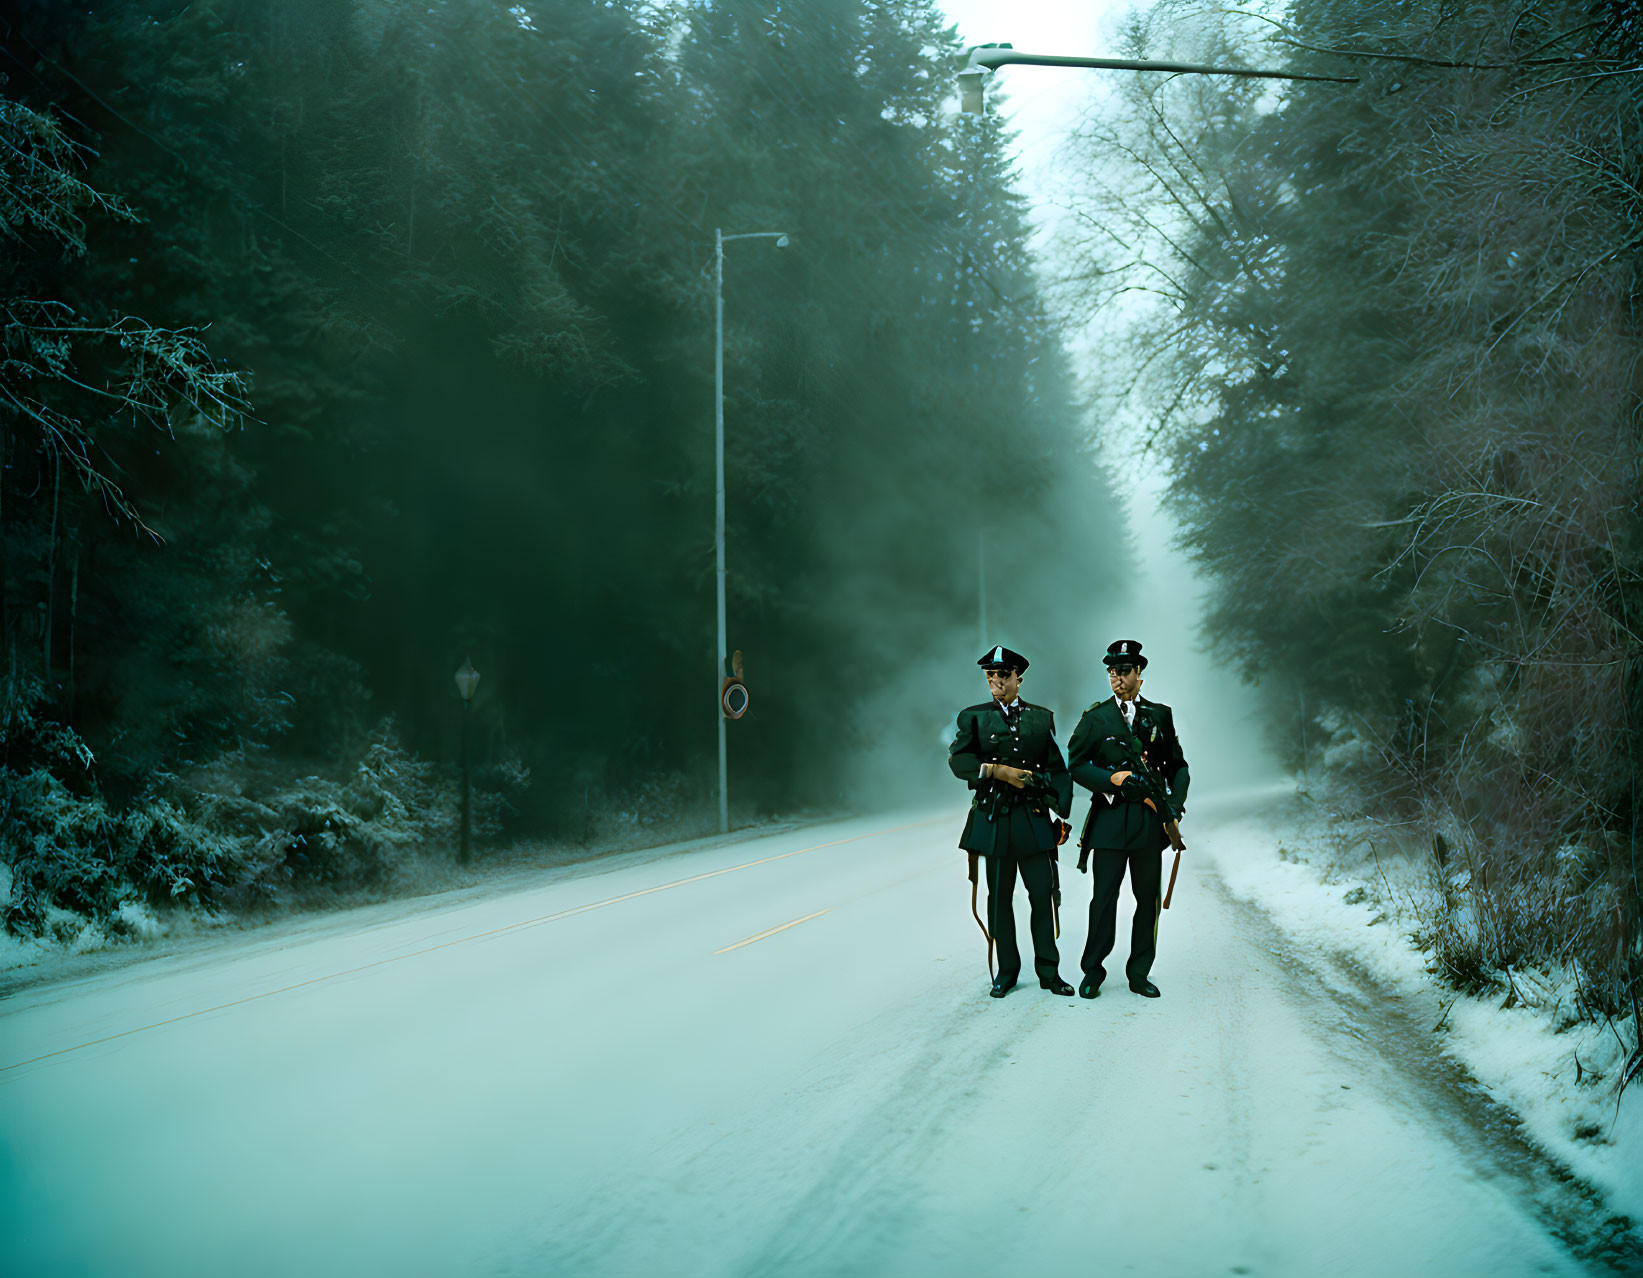 Three uniformed individuals marching on snowy road with misty trees